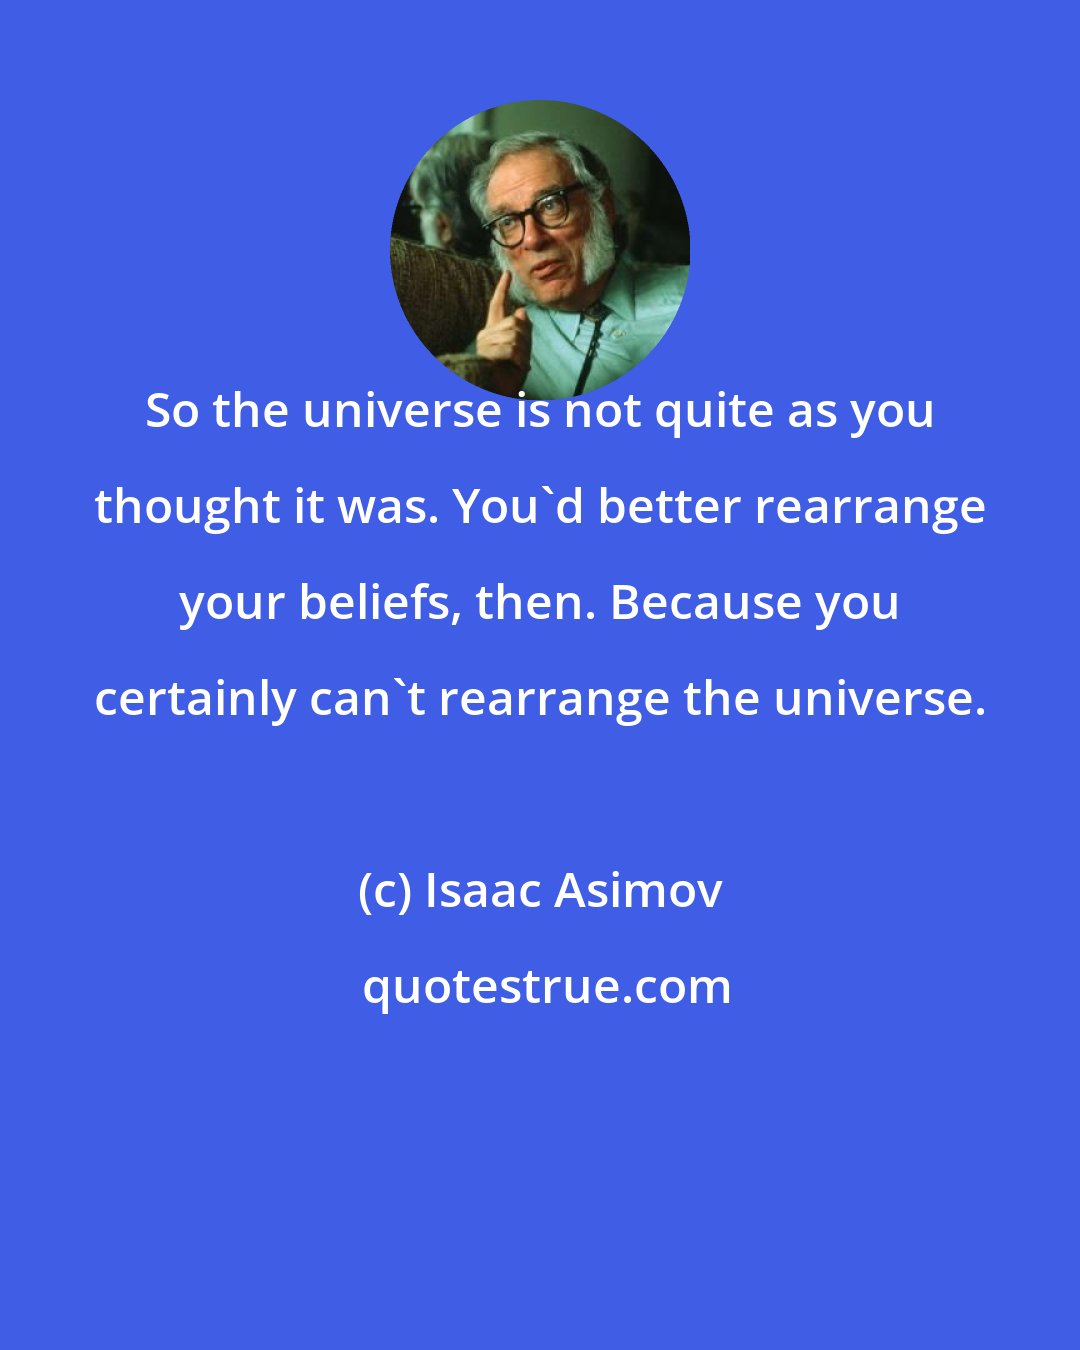 Isaac Asimov: So the universe is not quite as you thought it was. You'd better rearrange your beliefs, then. Because you certainly can't rearrange the universe.